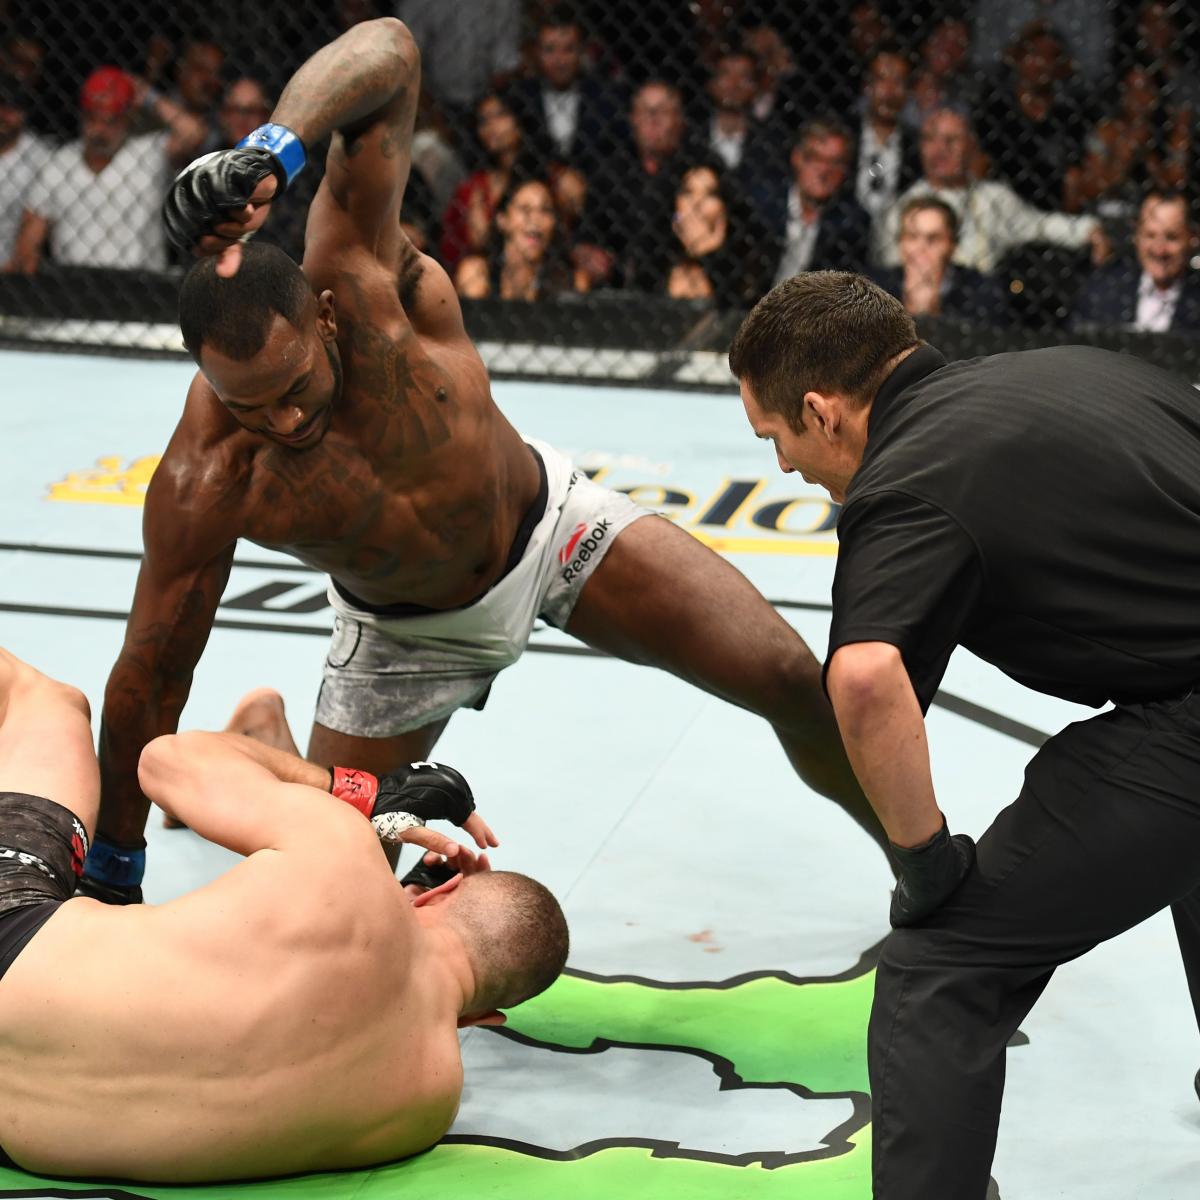 Mma Fighter Lands Vicious Straight Left Hand For Epic Upset Win At Ufc 226 Bleacher Report